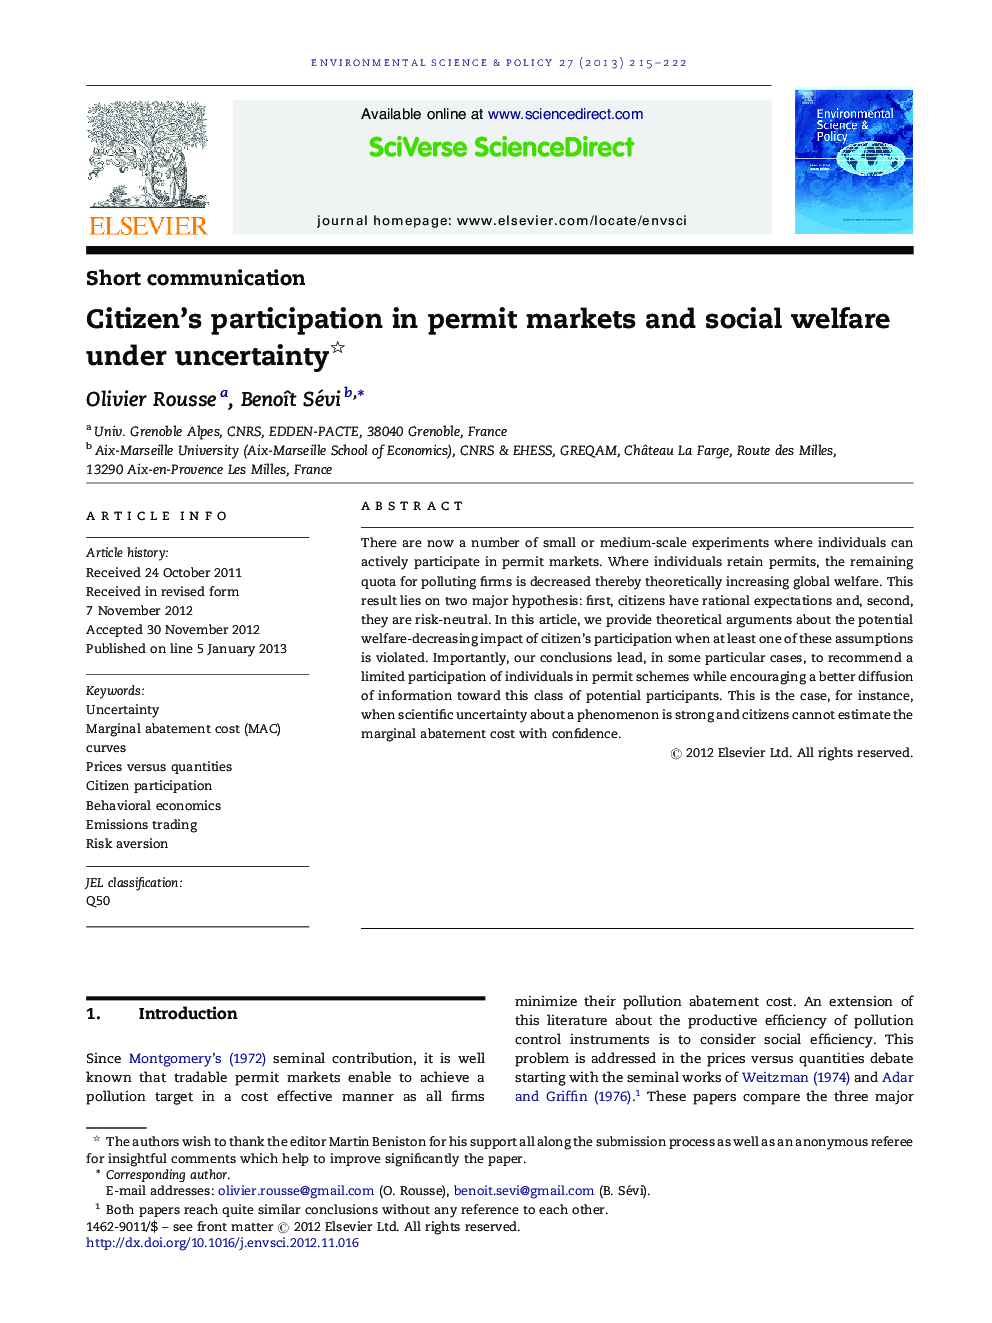 Citizen's participation in permit markets and social welfare under uncertainty